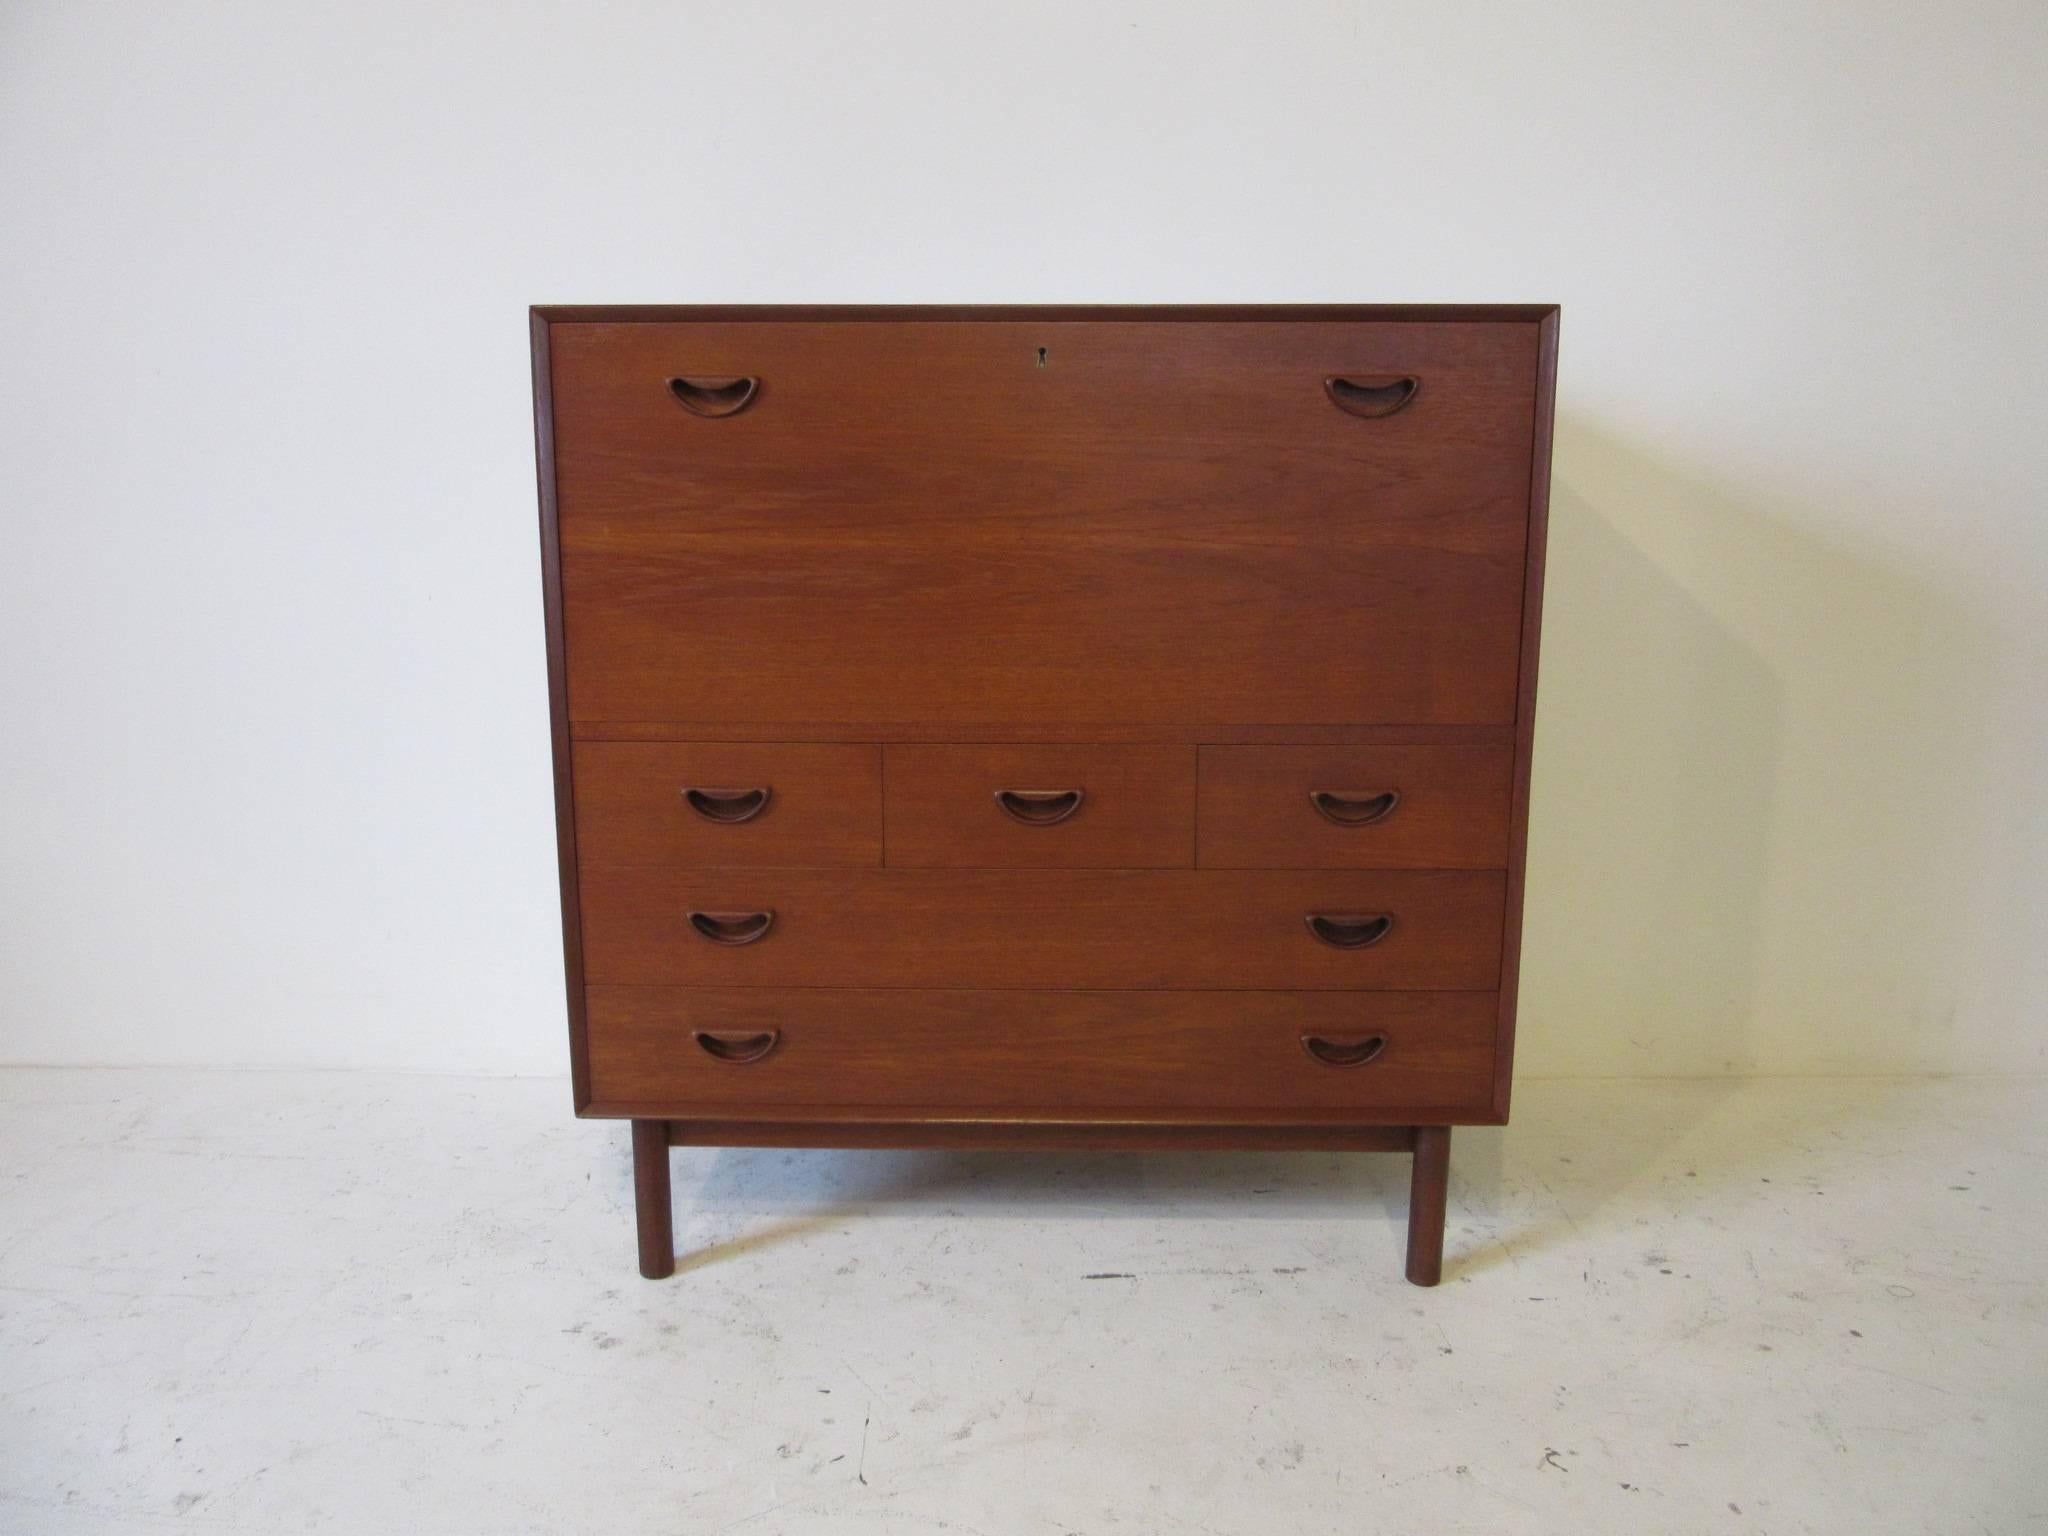 A medium dark teak wood chest with flip down locking front desk top with key, two slim pullout drawers with dividers and five lower drawers. Well designed and made with finger joints to the top edges and bottom, made in Denmark by Soborg Mobler, the